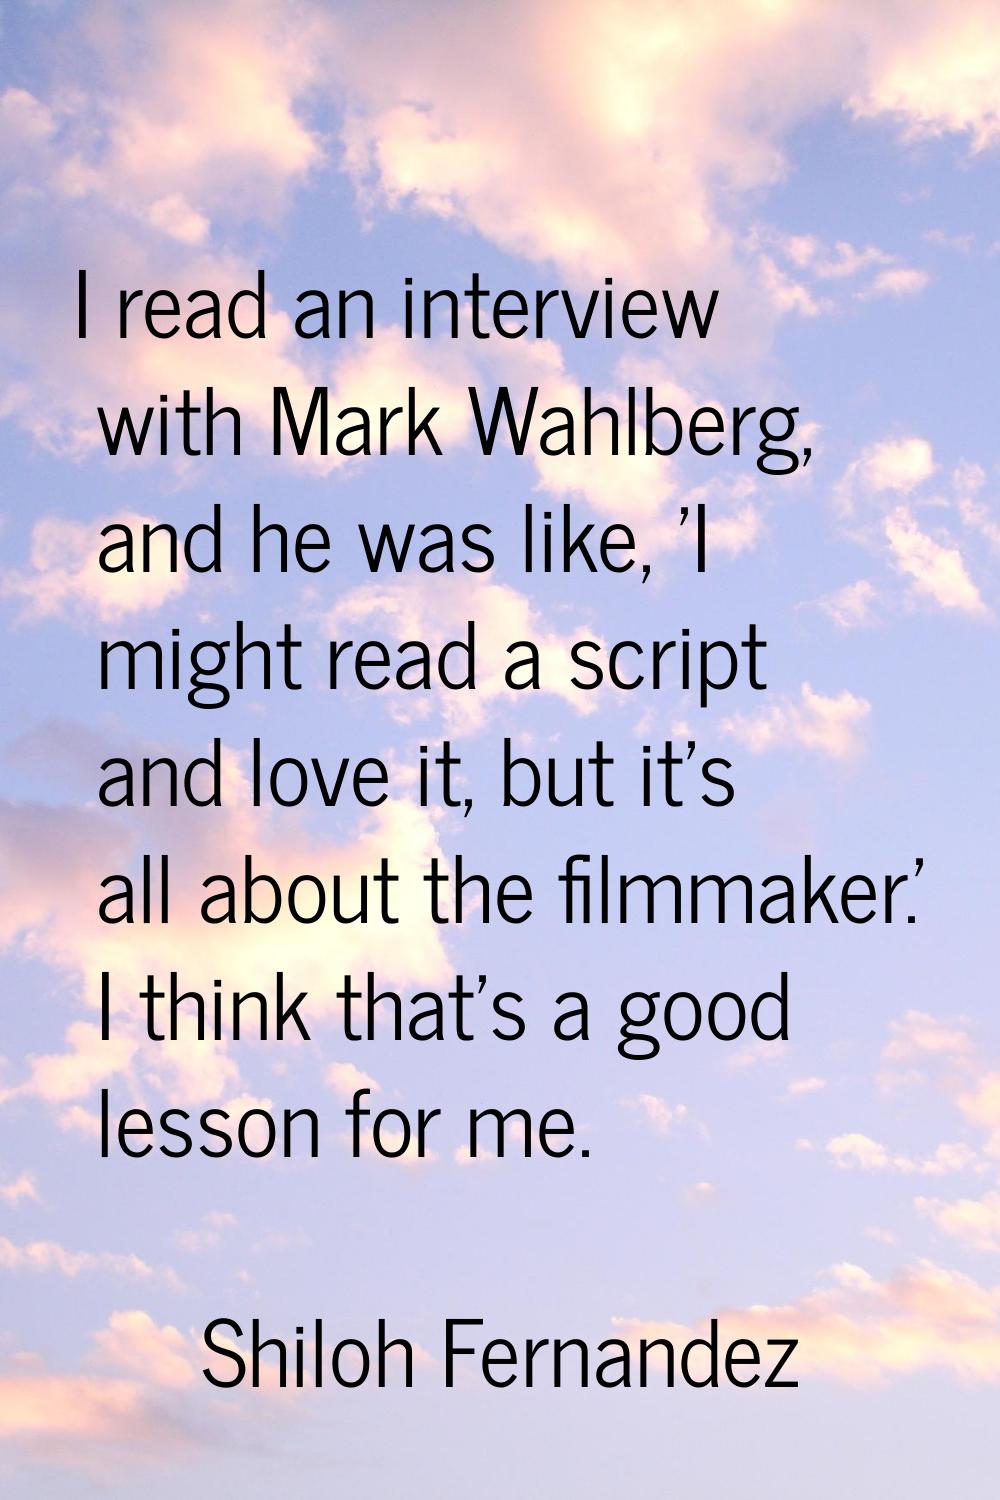 I read an interview with Mark Wahlberg, and he was like, 'I might read a script and love it, but it